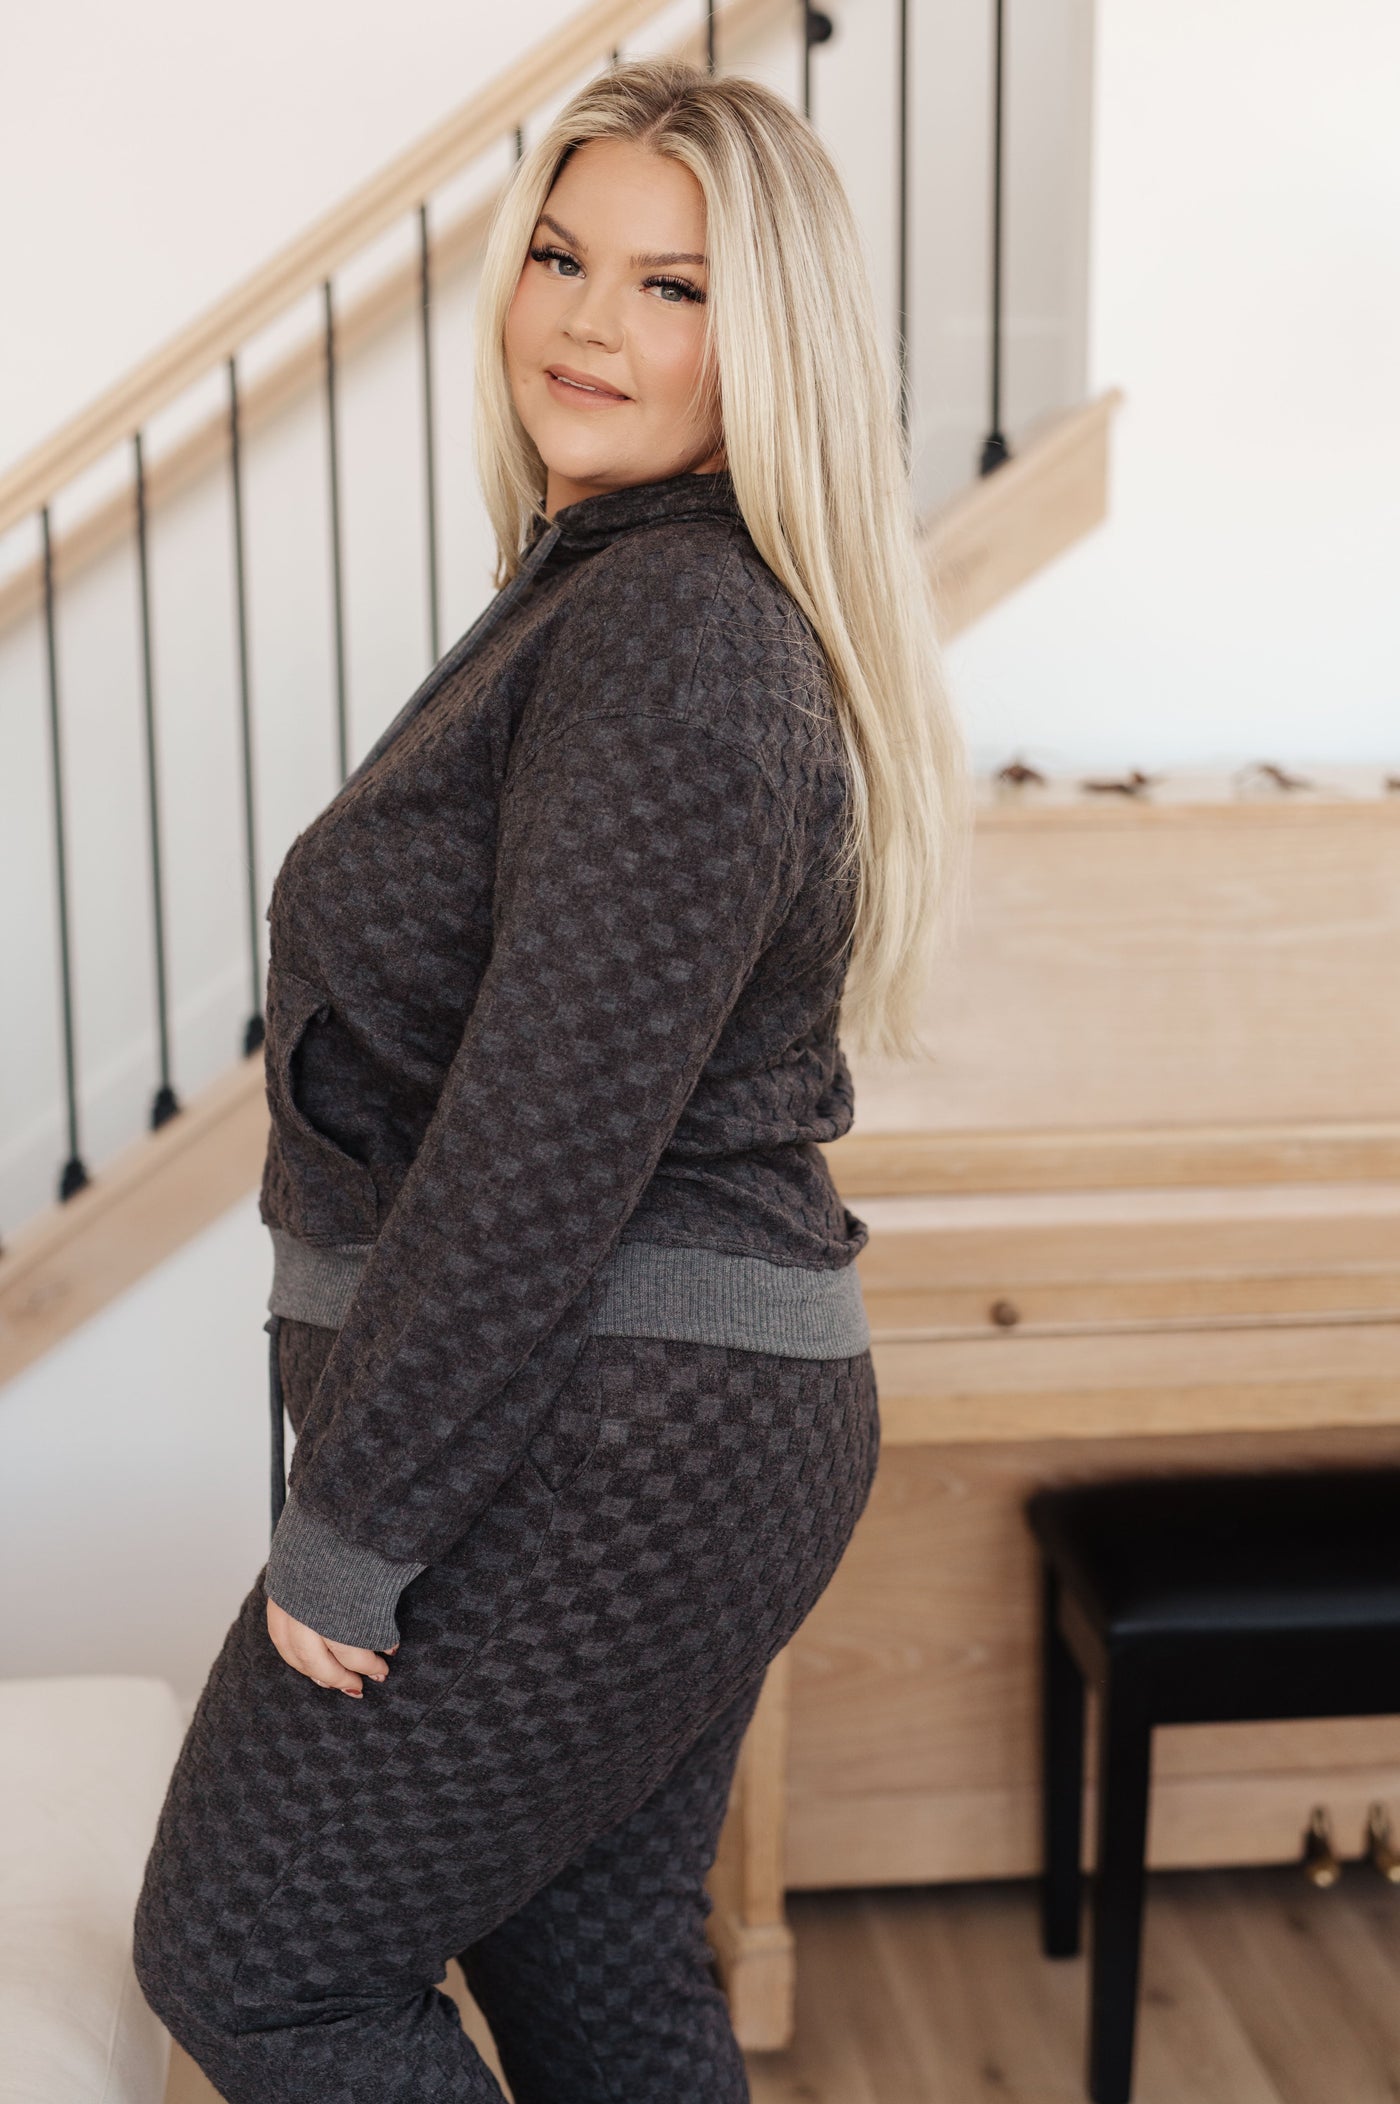 Look no further for the perfect weekend outfit—the Mic Check Checkered Lounge Set is here! Comfortable and stylish, this set features a checkered Hacci knit hooded sweatshirt 